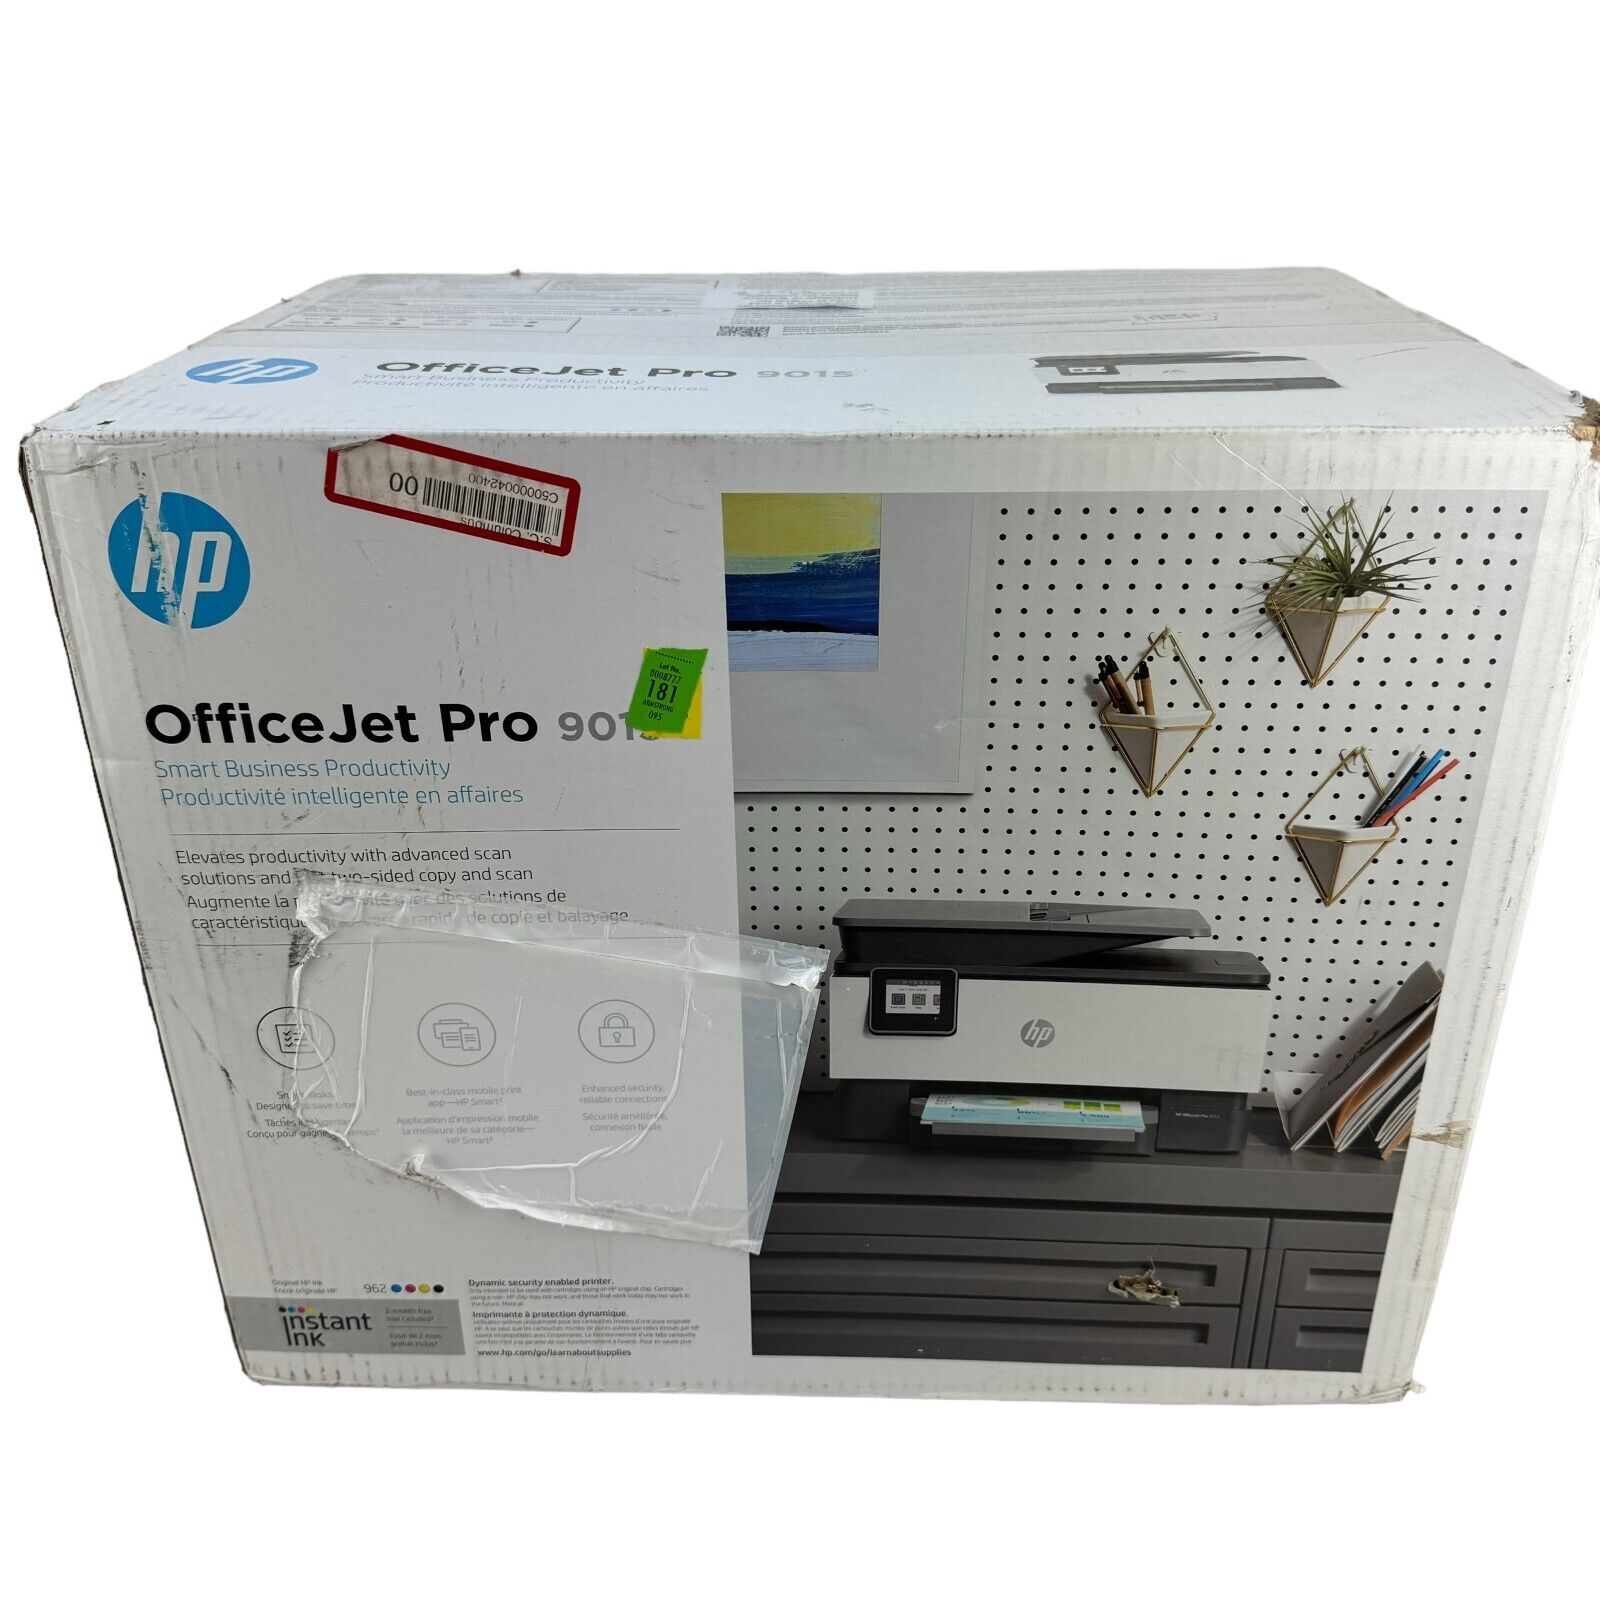 HP OfficeJet Pro 9015 All-in-One Touch Wireless Two Sided Printer Copy Scan Fax